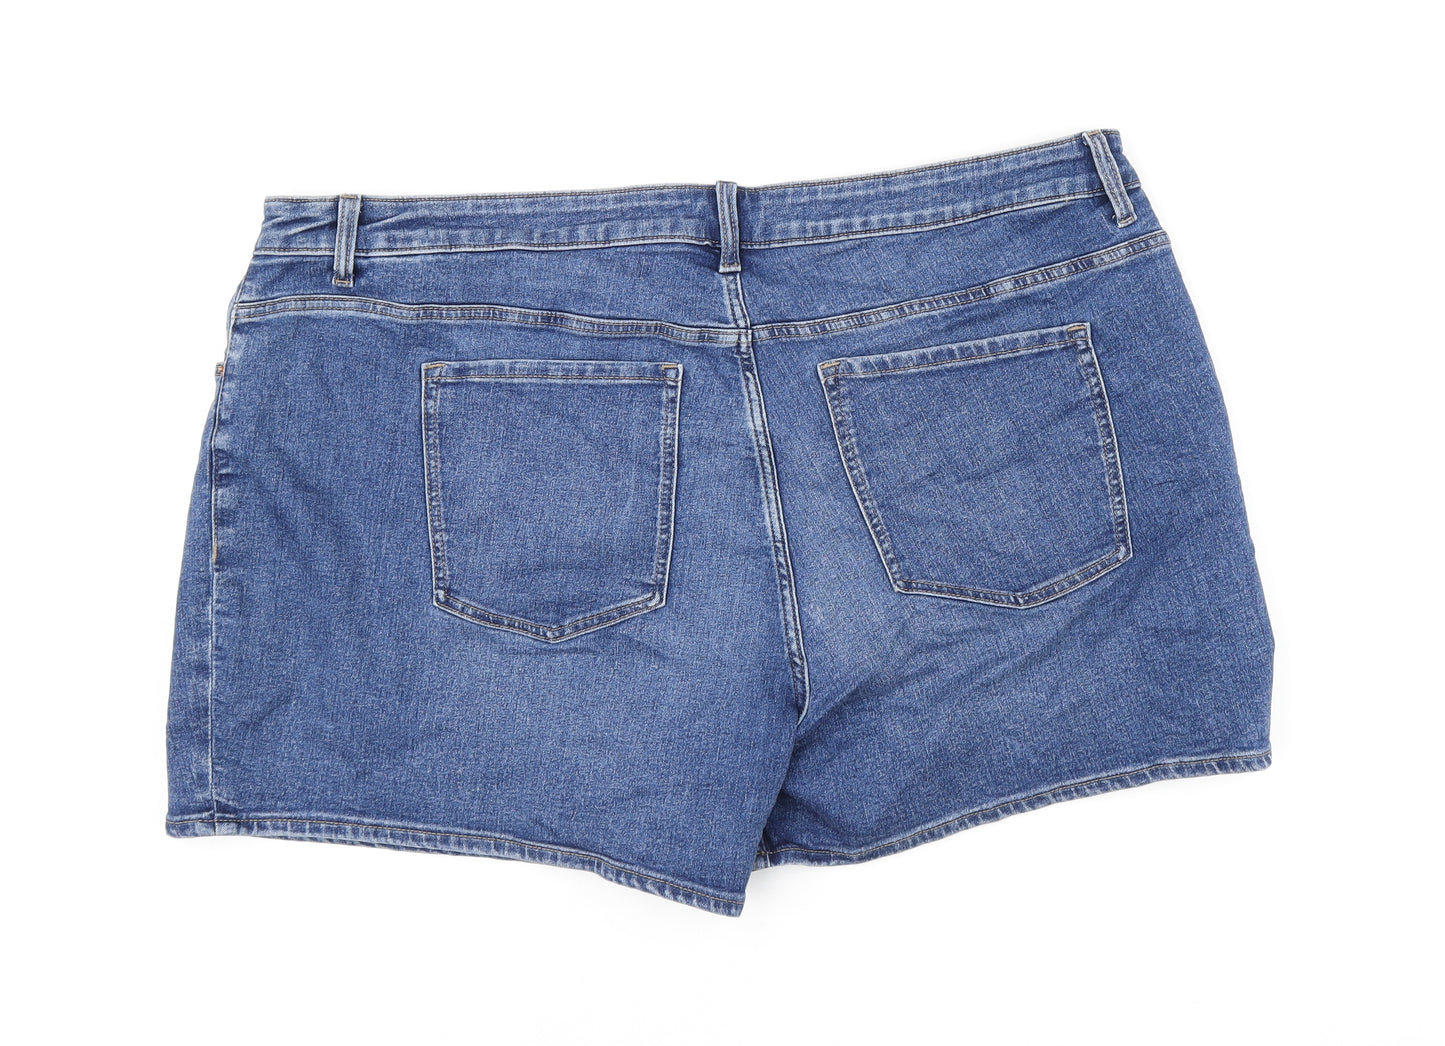 Marks and Spencer Womens Blue Cotton Hot Pants Shorts Size 24 L5.5 in Regular Zip